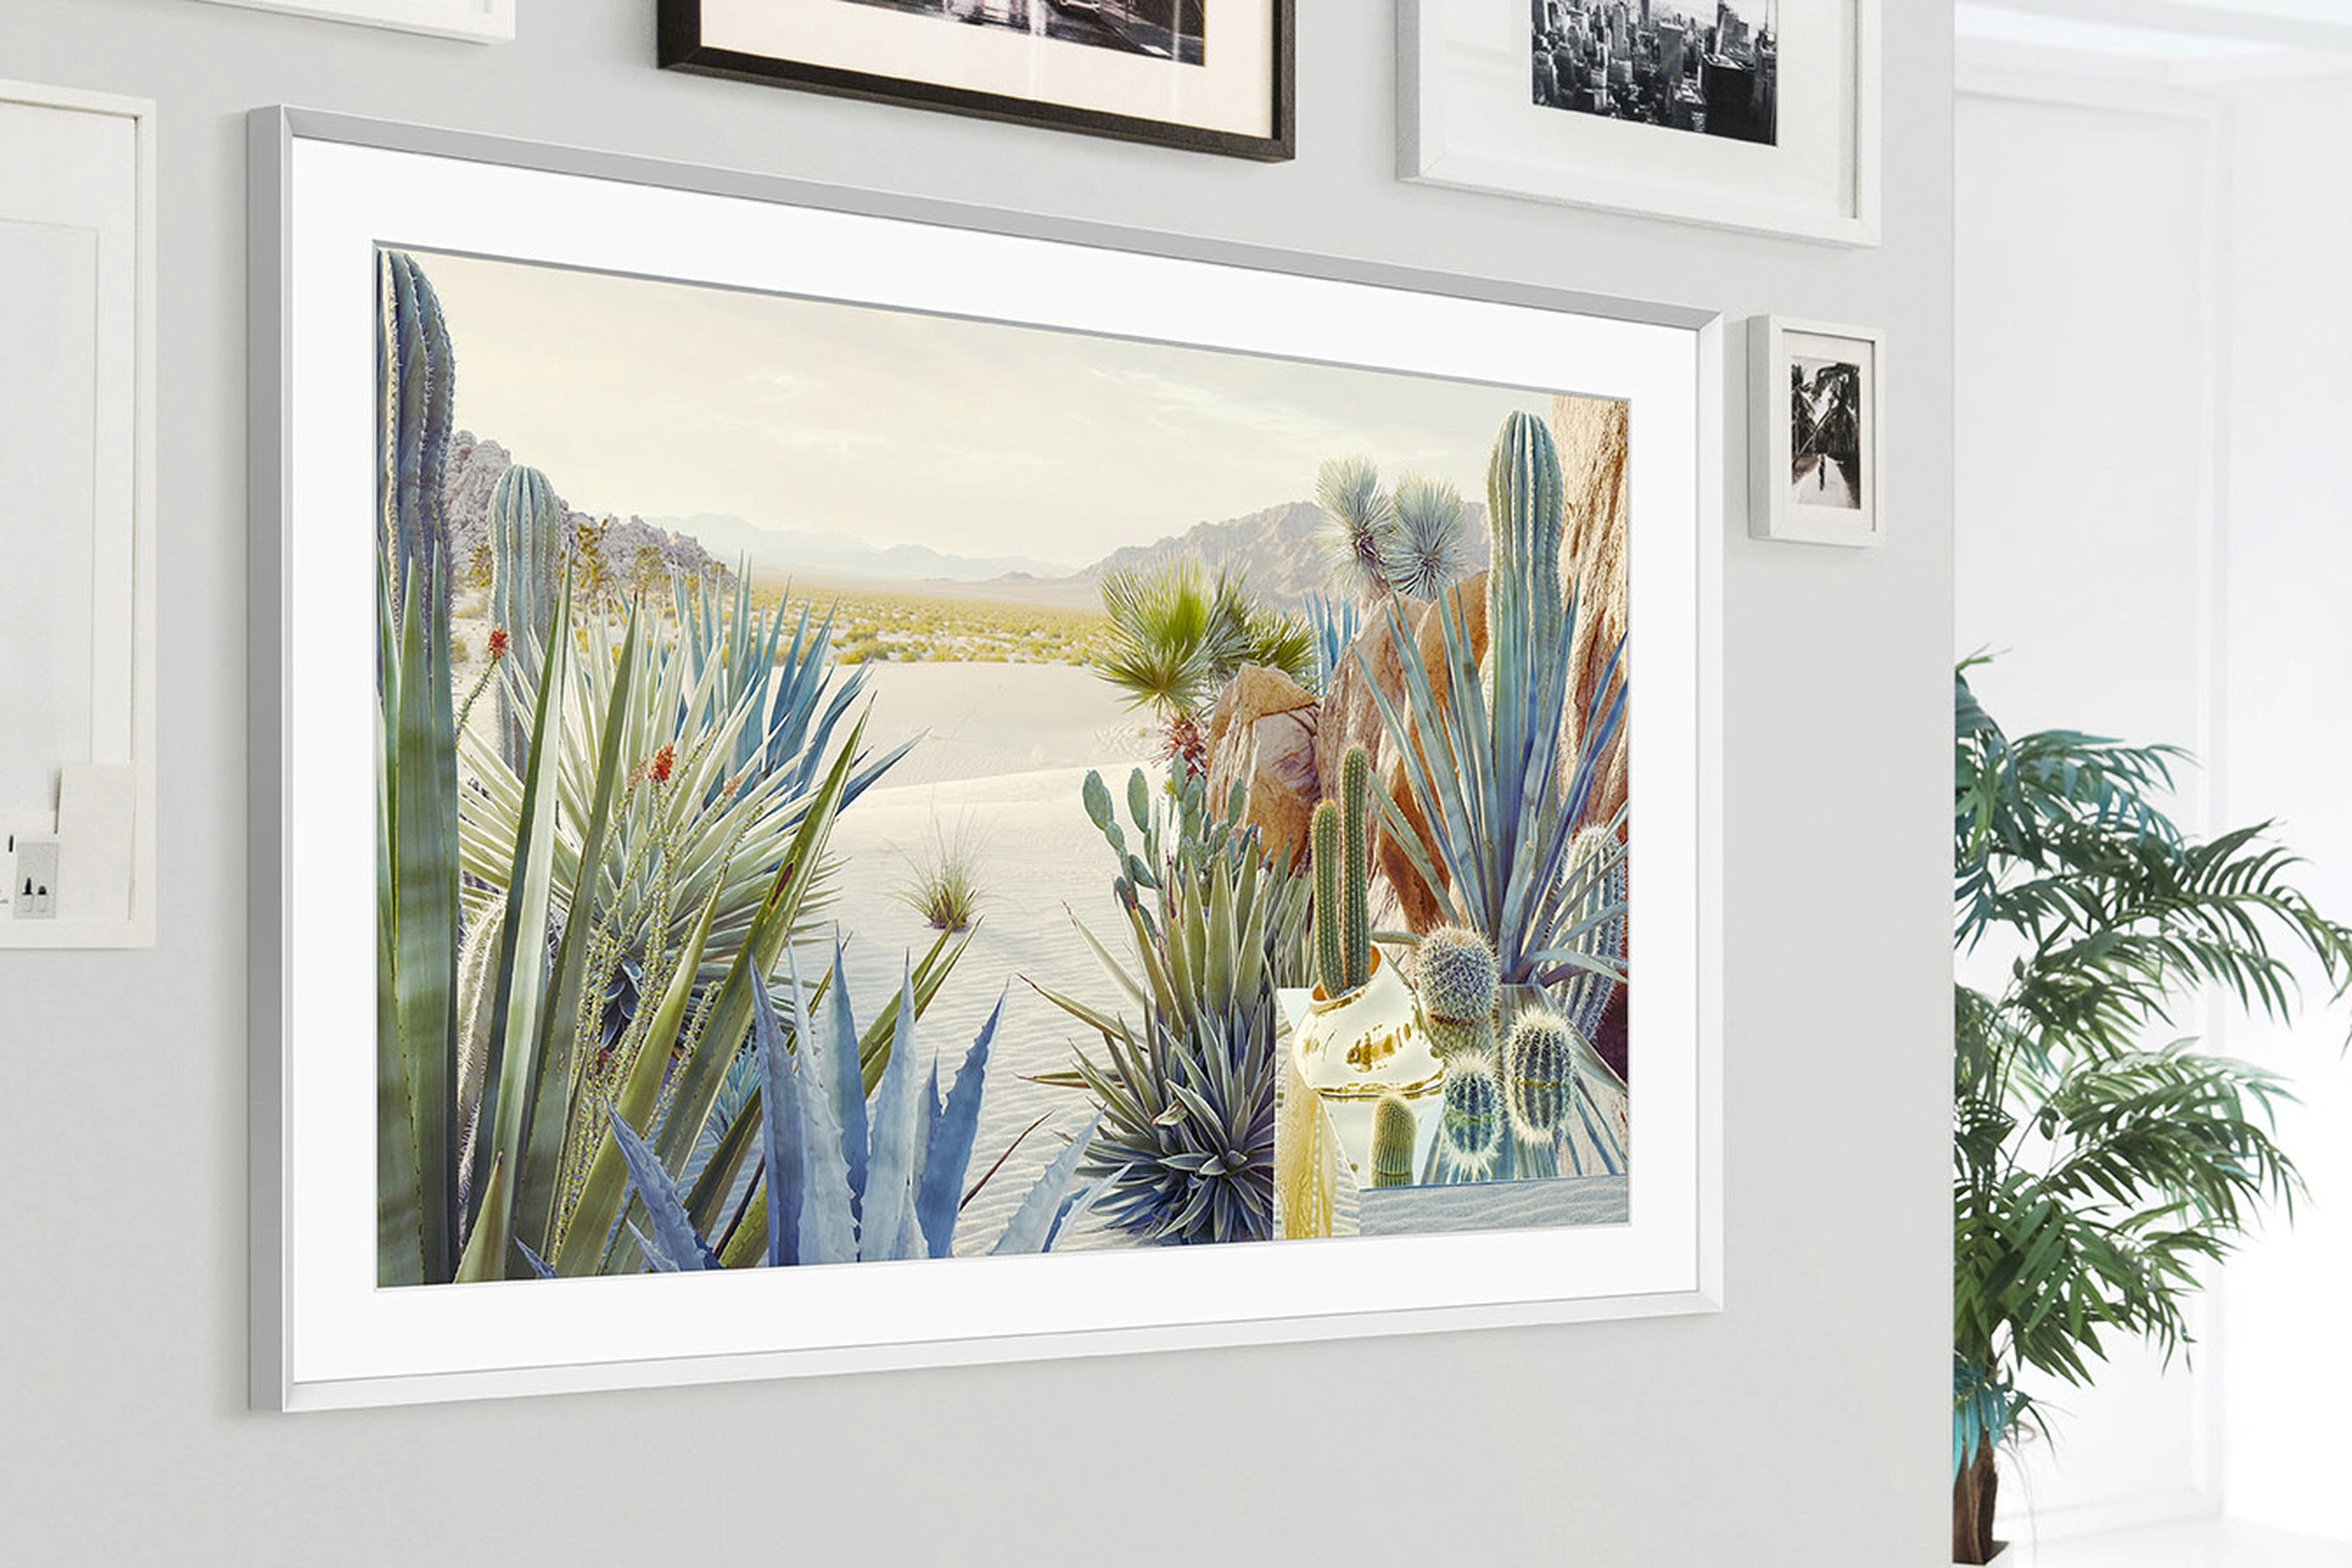 When not in use, Samsung’s Frame TV can be used to display more than 1,400 works of art.